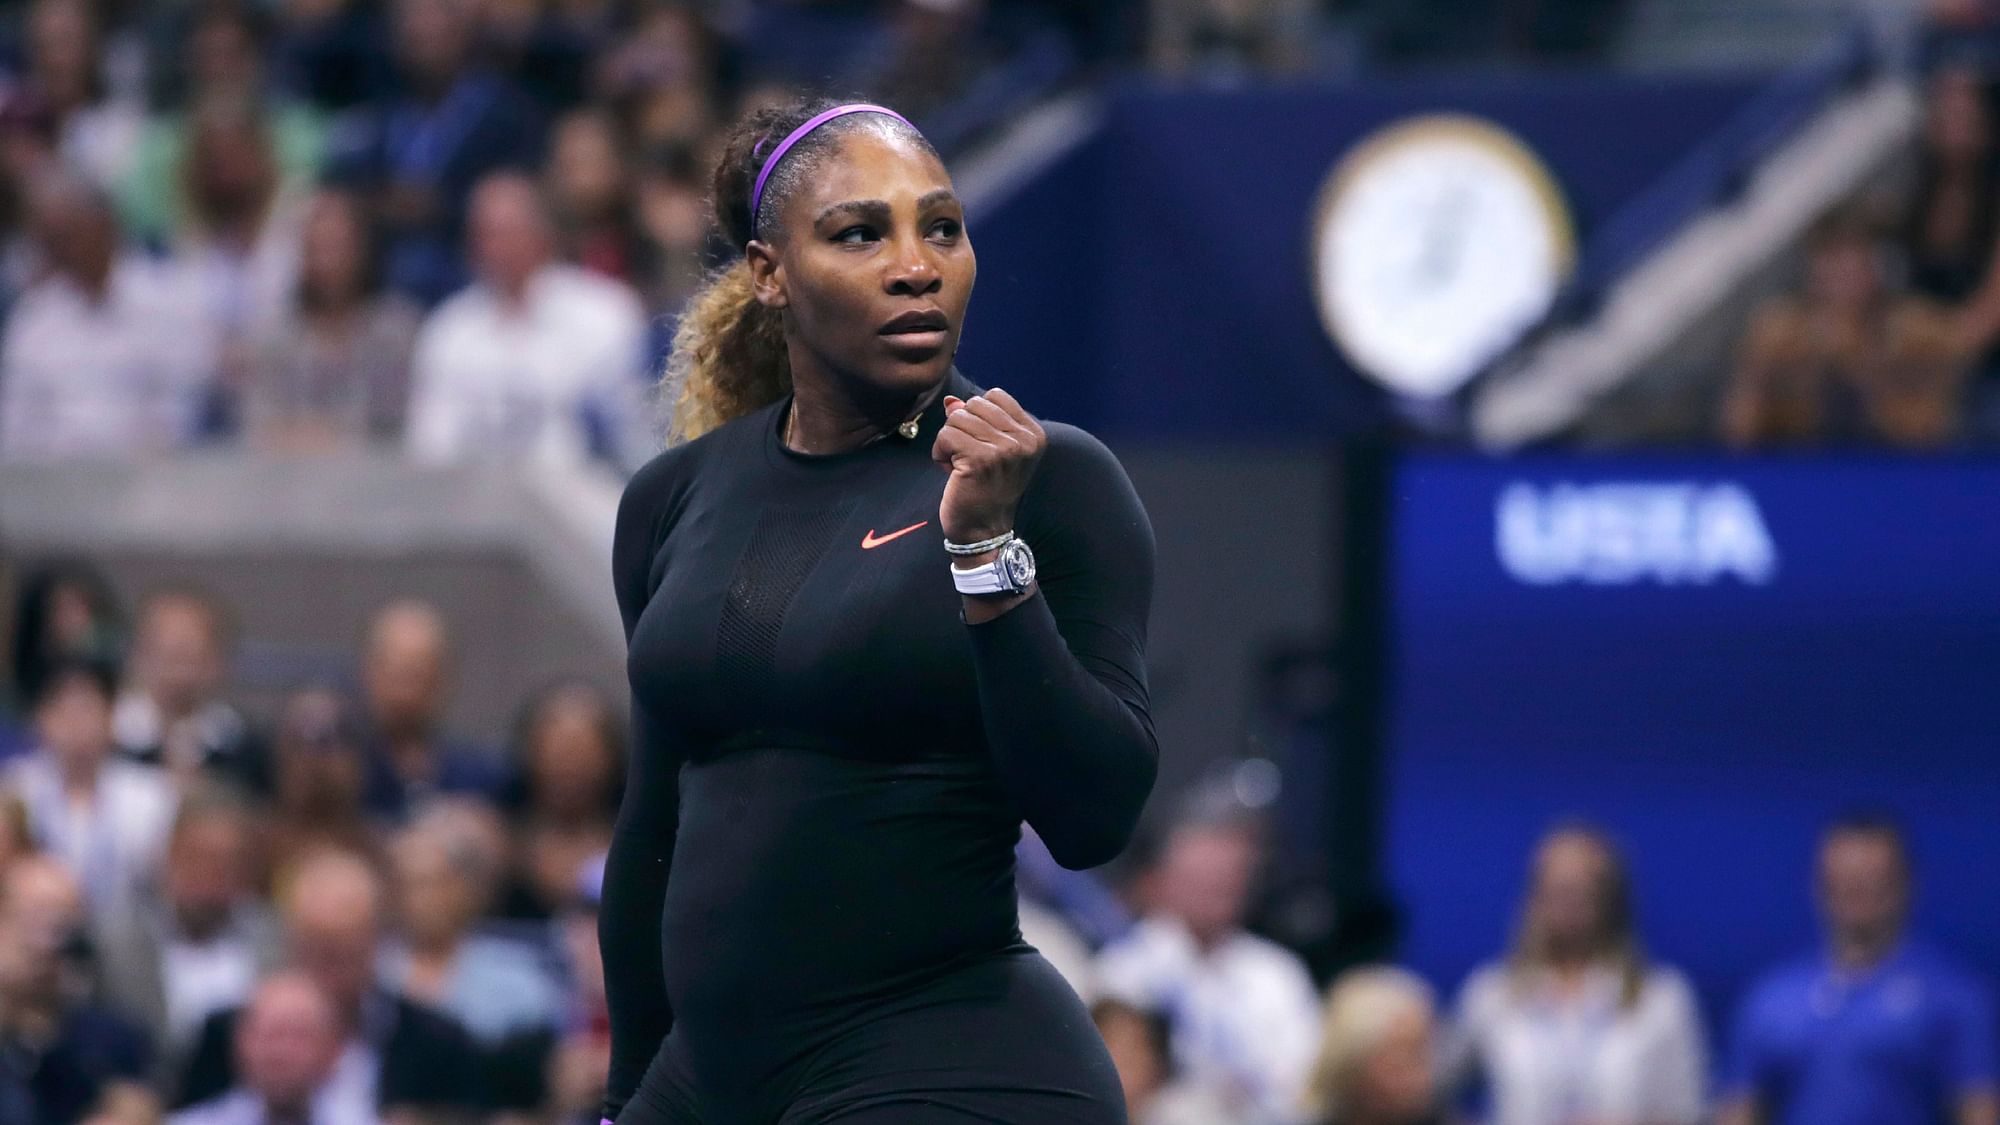 The numbers associated with Serena Williams’ US Open quarterfinal victory over Wang Qiang were so stark.